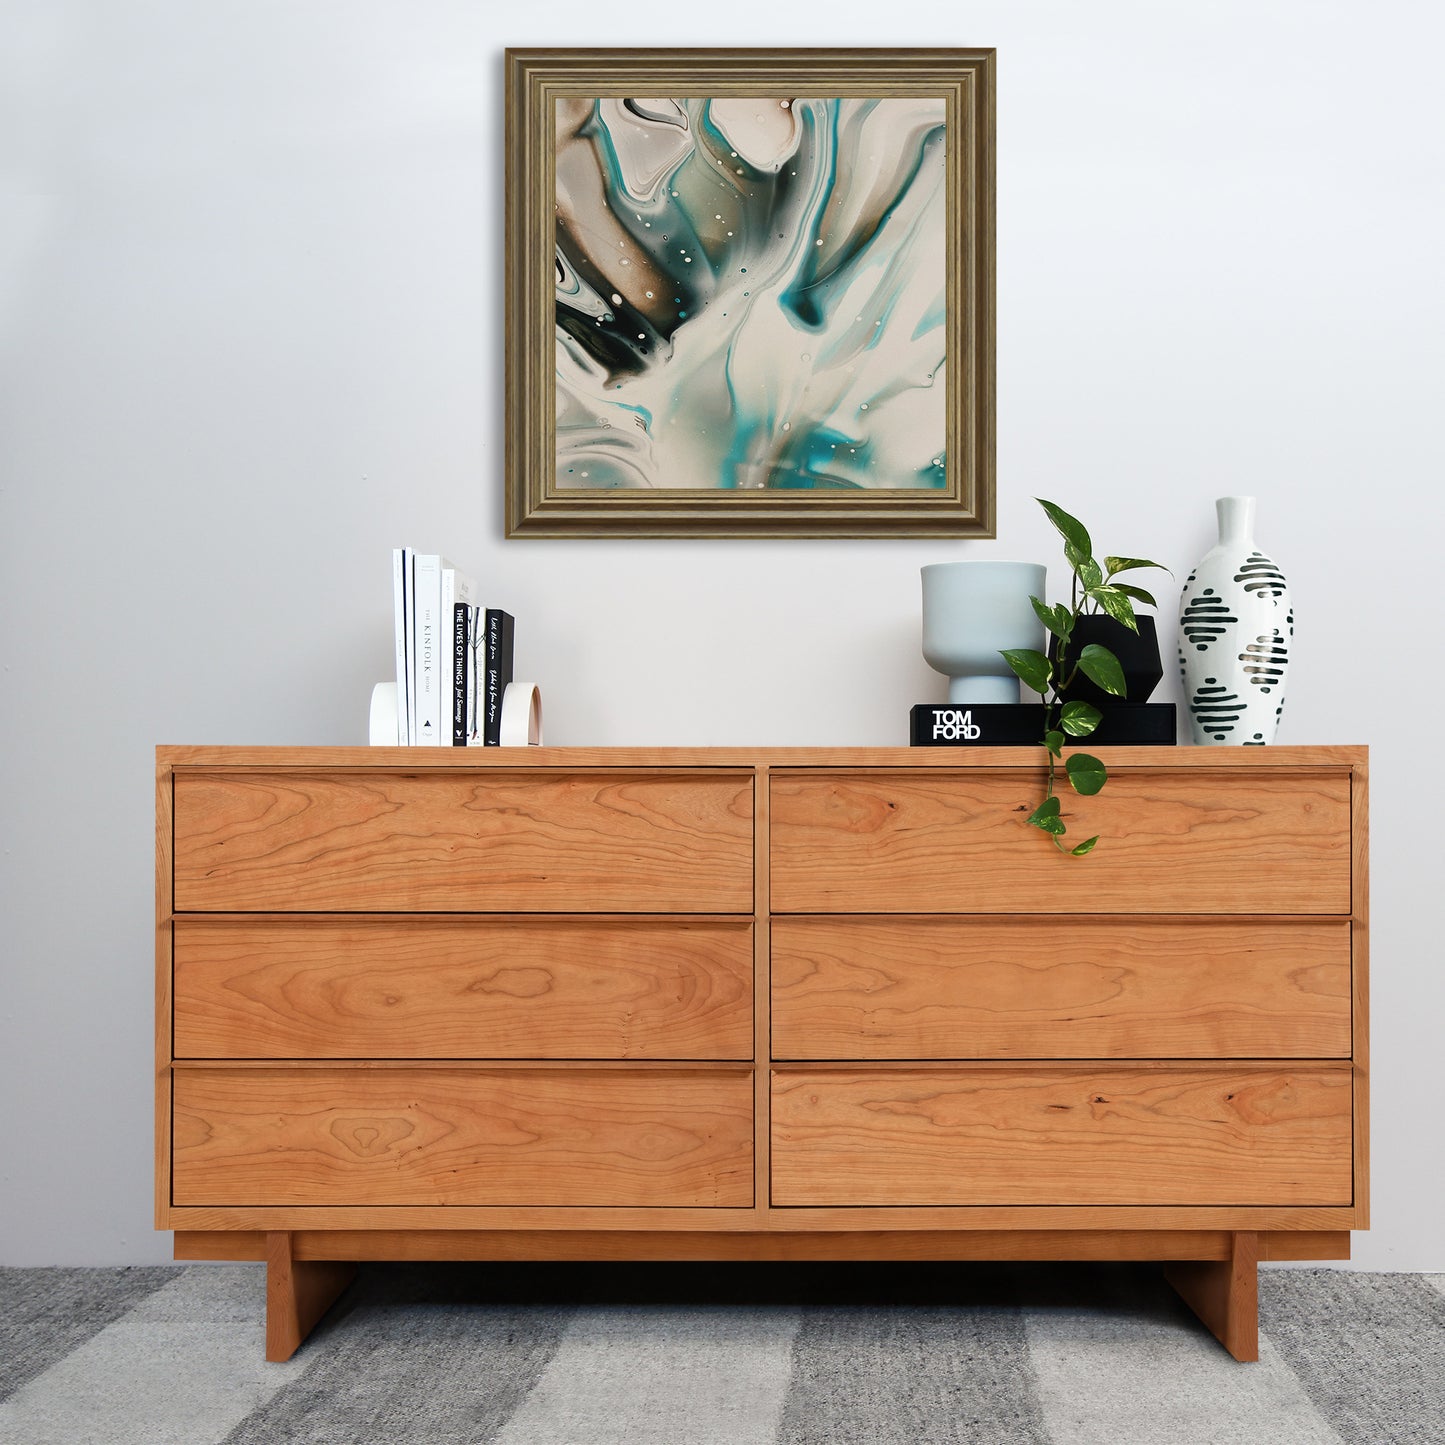 A modern design Vermont Furniture Designs Kipling 6-Drawer Dresser in natural cherry stands against a white wall, topped with decorative items including a framed abstract painting, books, a clock, and plant pots.